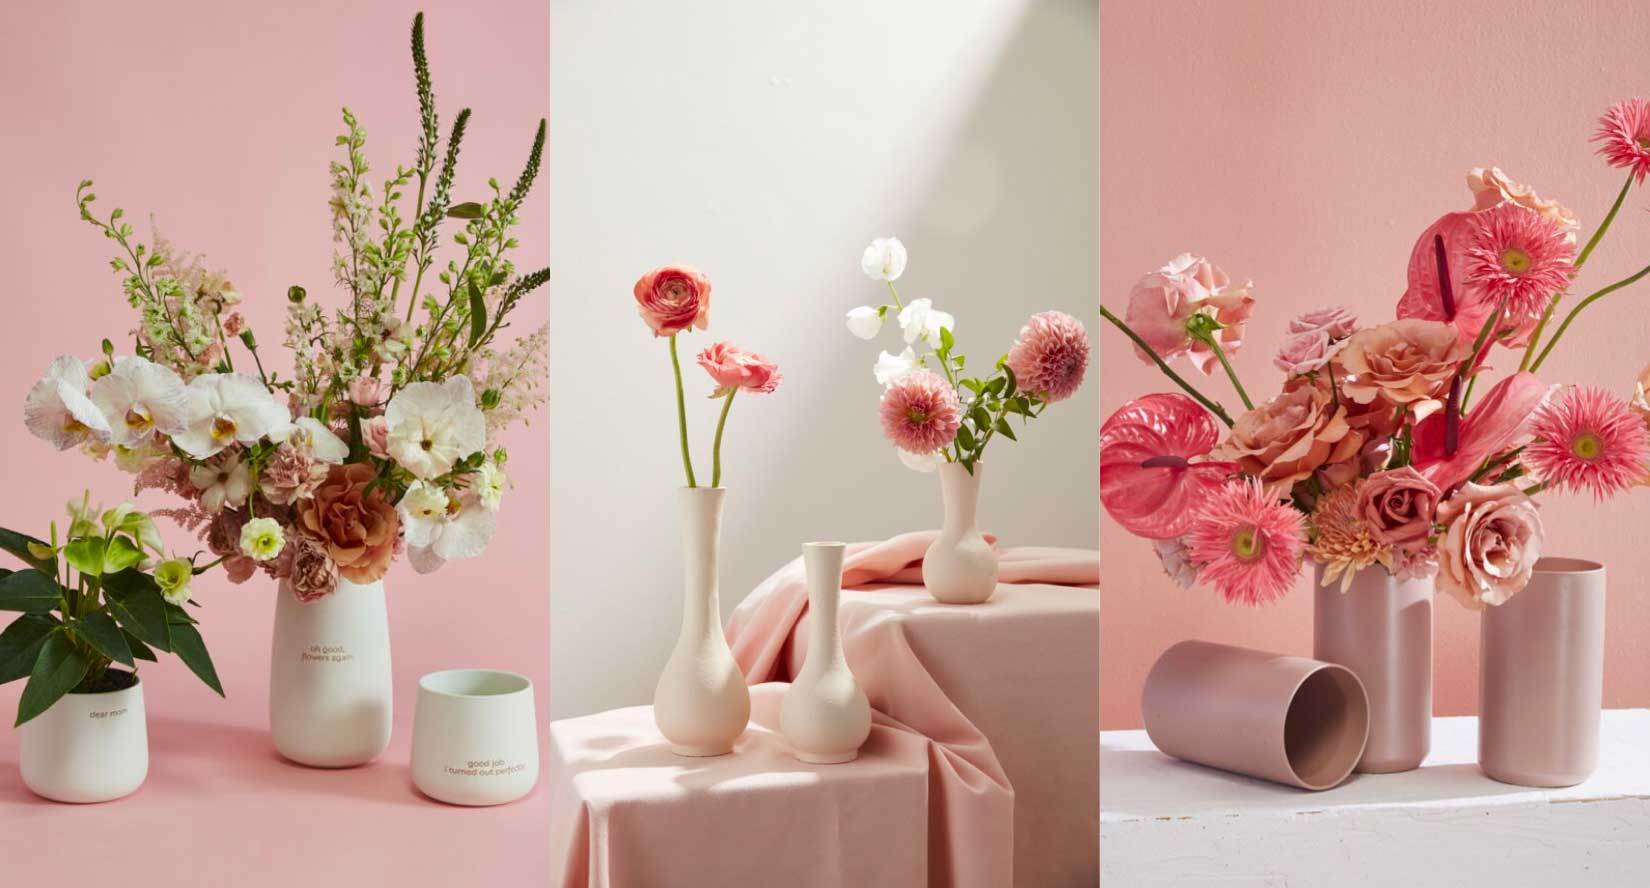 Hero image featuring Mother's Day flower vases and pots